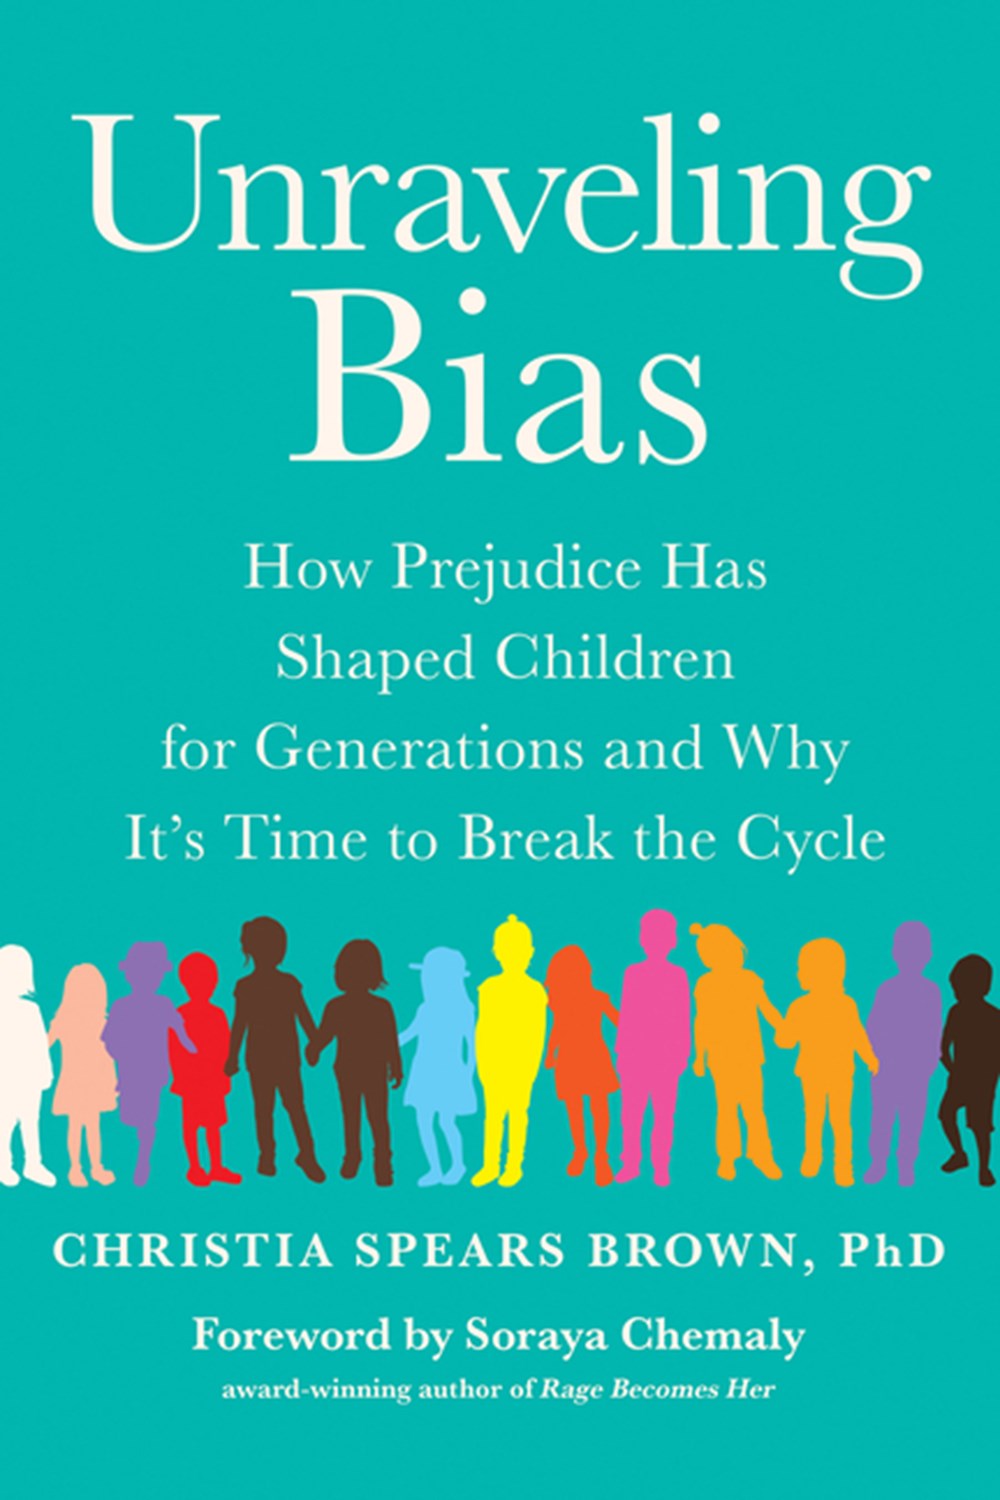 Unraveling Bias: How Prejudice Has Shaped Children for Generations and Why It's Time to Break the Cy